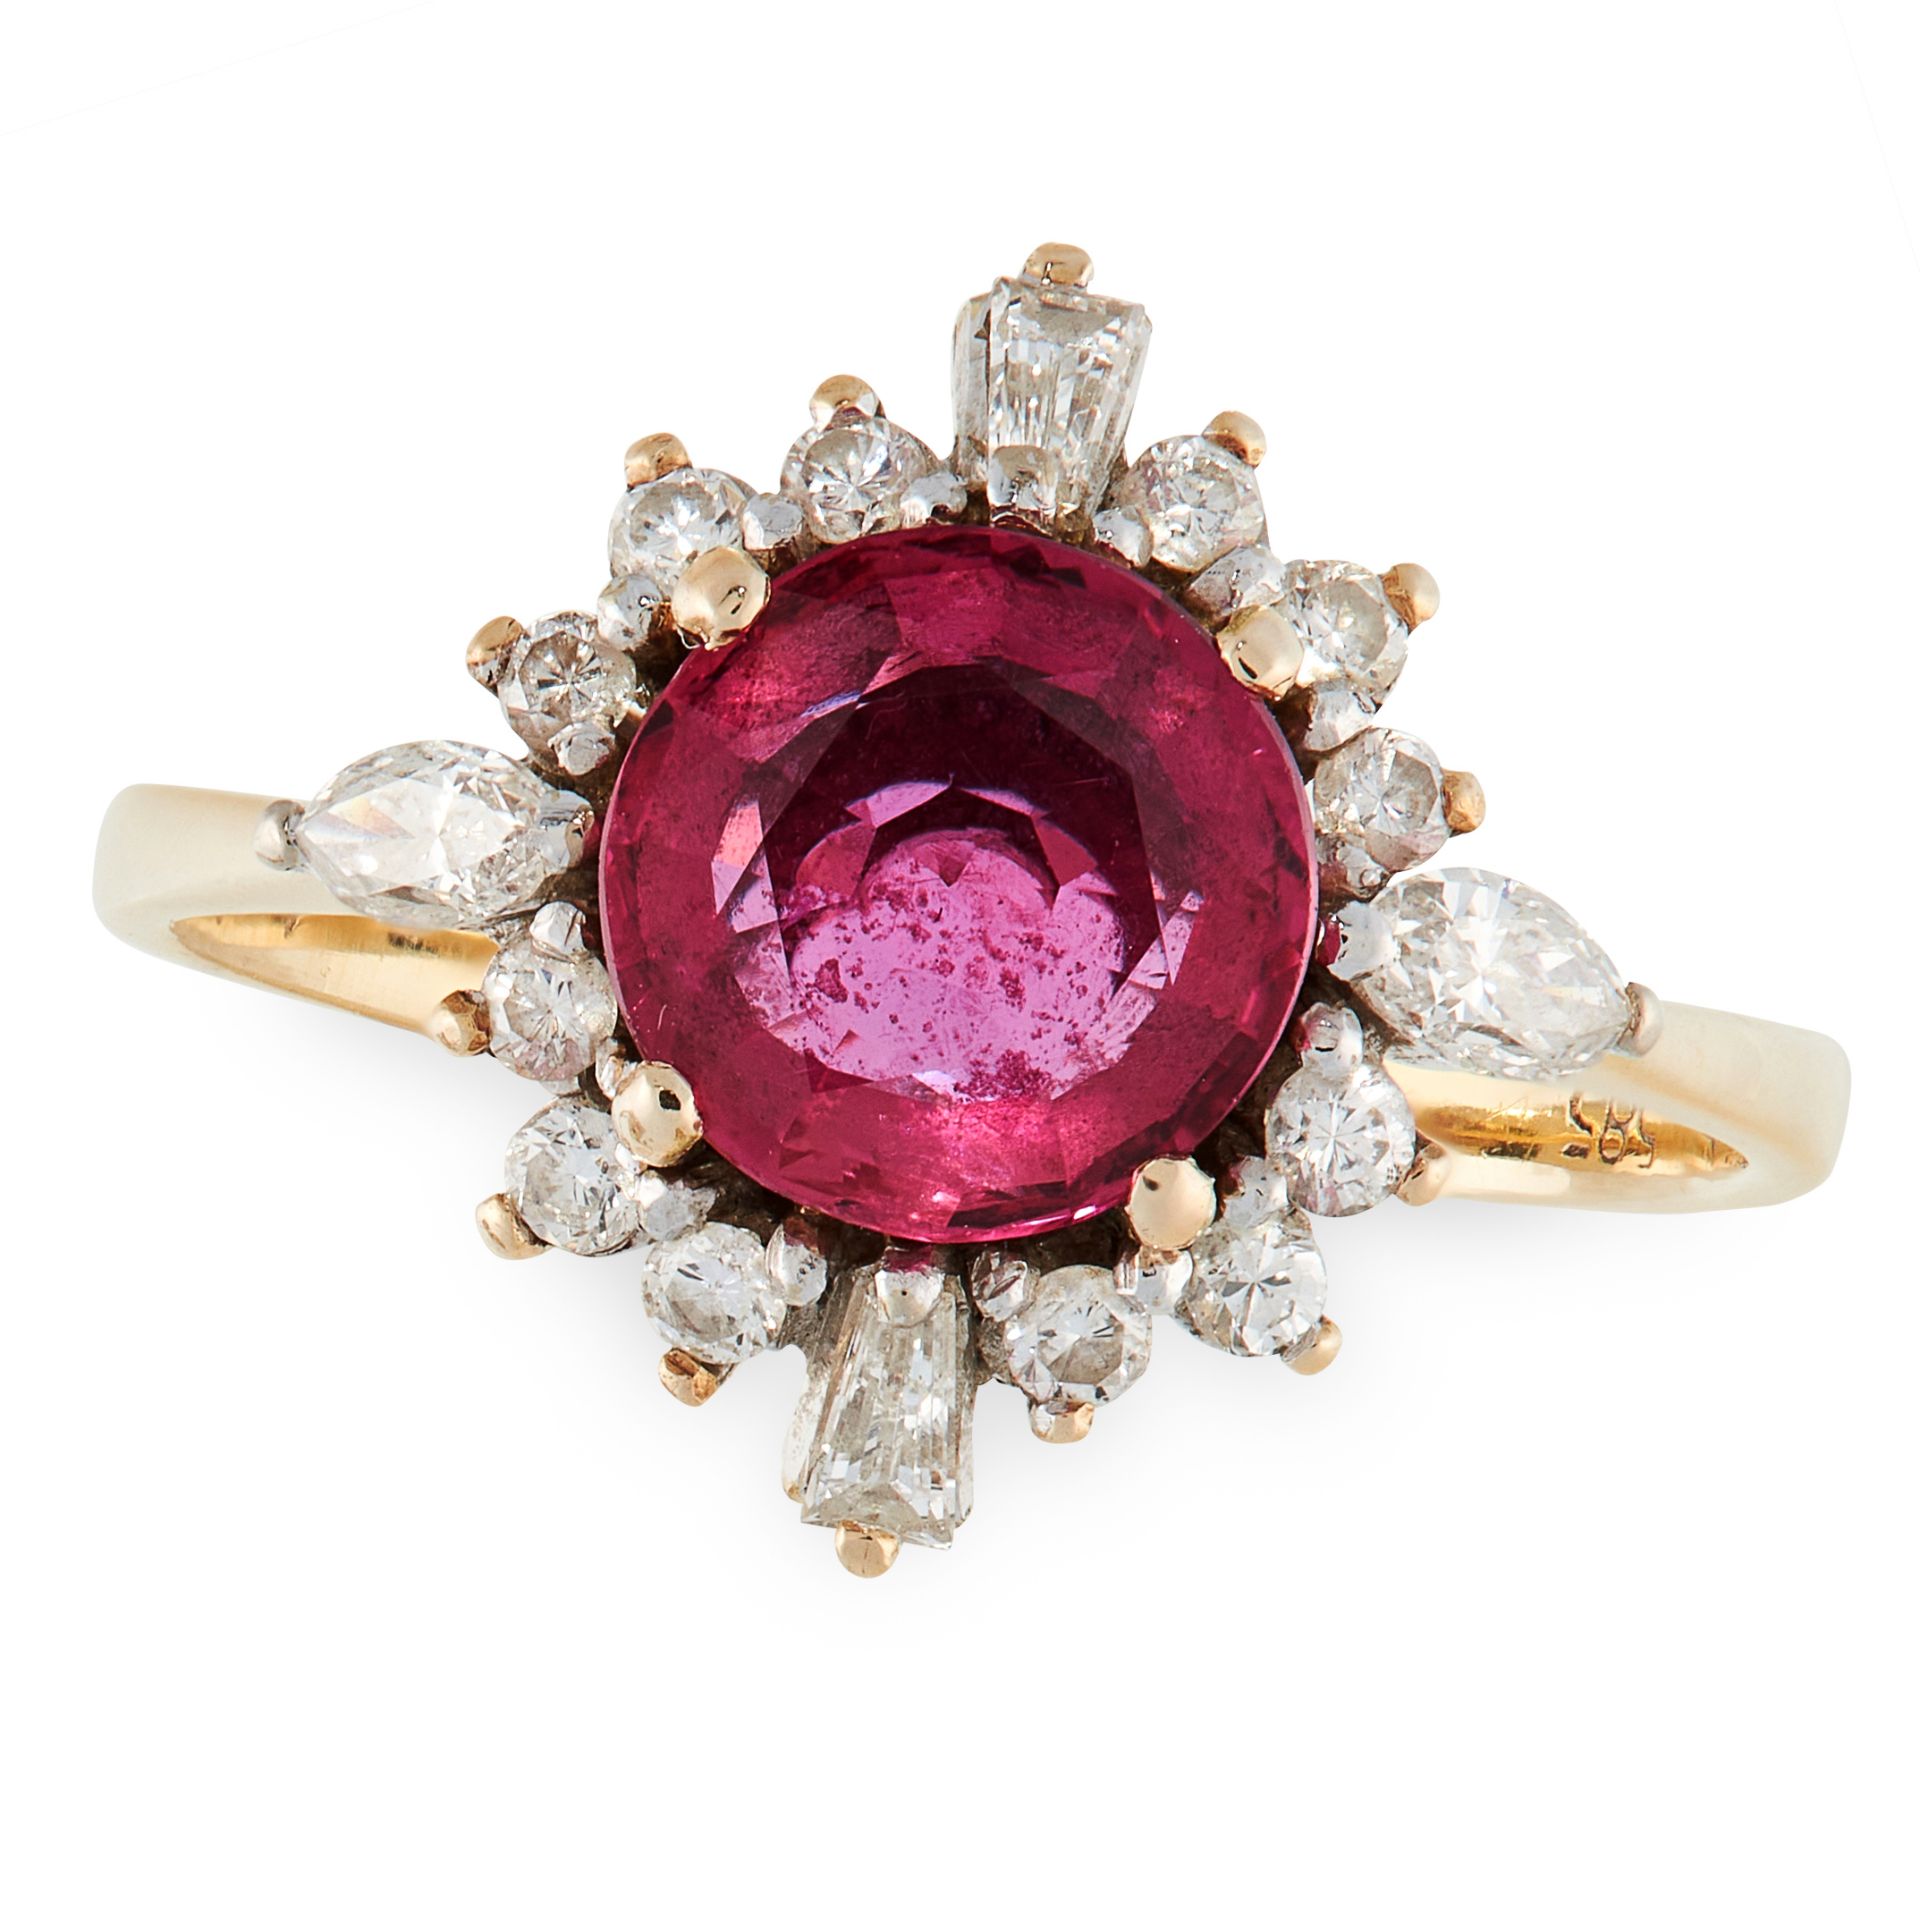 A RUBY AND DIAMOND CLUSTER RING in yellow gold, set with a round cut ruby of 0.75 carats in a border